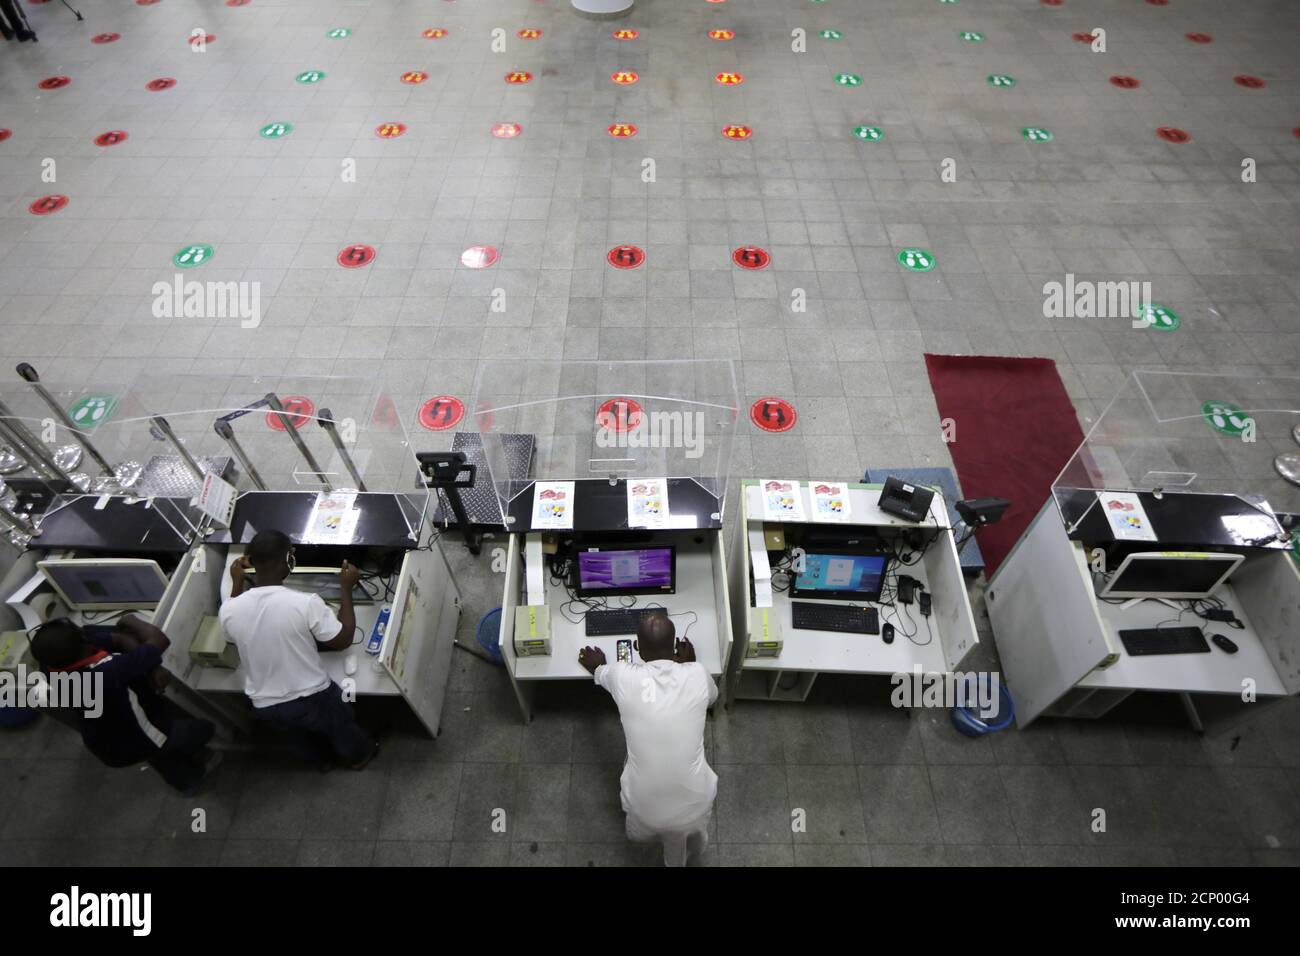 Airline staff members are seen at their desks at the Nnamdi Azikiwe International airport during preparation ahead of the reopening of the airport for domestic flight operations that is scheduled for July 8, 2020 in Abuja, Nigeria July 6, 2020. REUTERS/Afolabi Sotunde Stock Photo